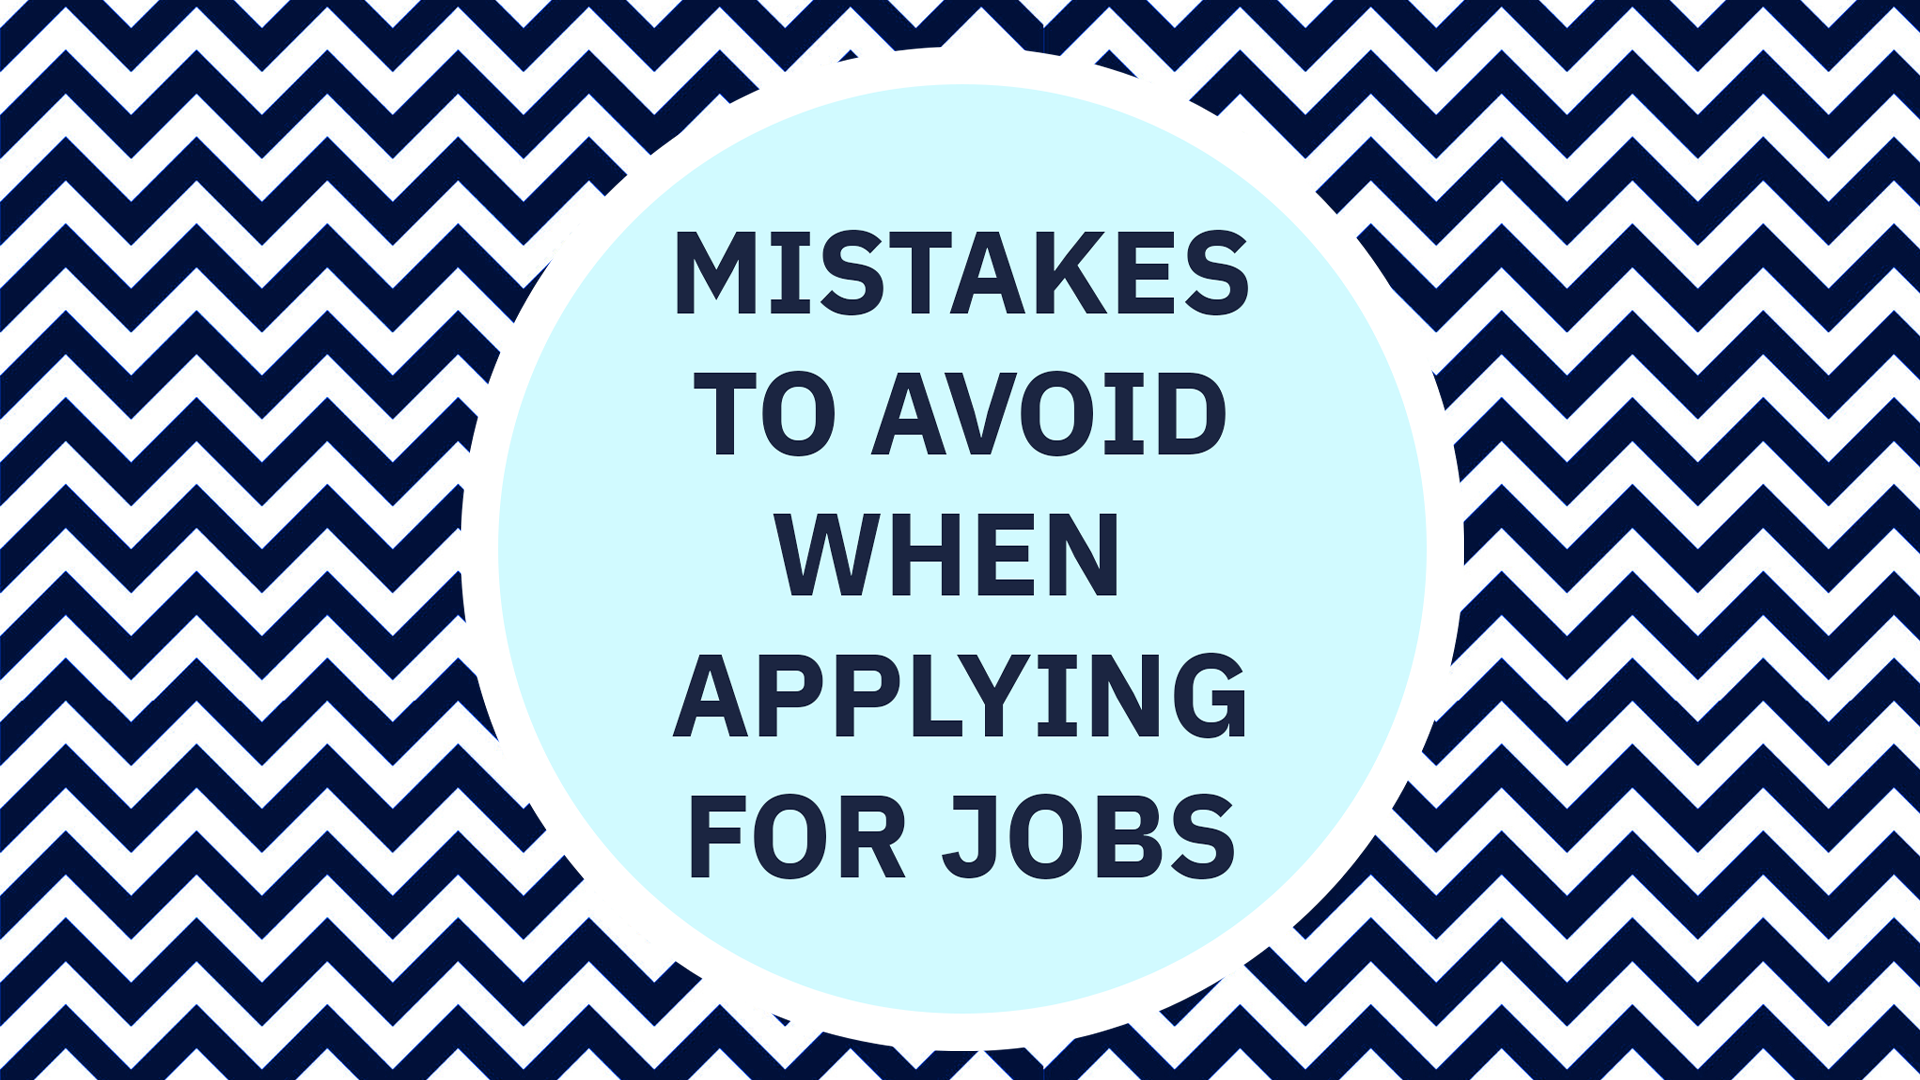 PCN's Guide to Job Success - Mistakes to avoid when applying for jobs